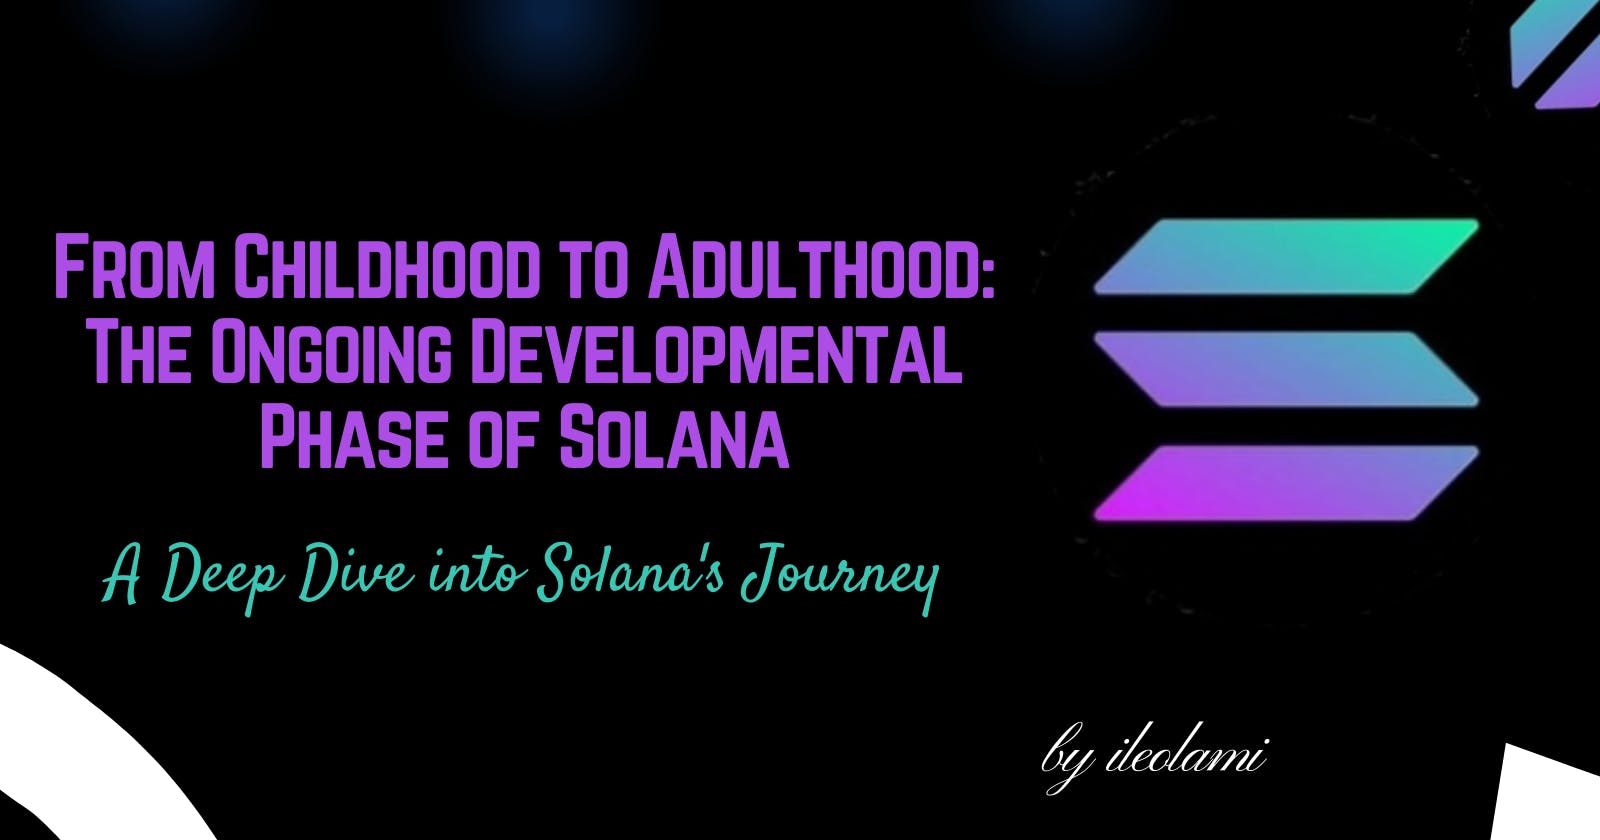 From Childhood to Adulthood: The Ongoing Developmental Phase of Solana